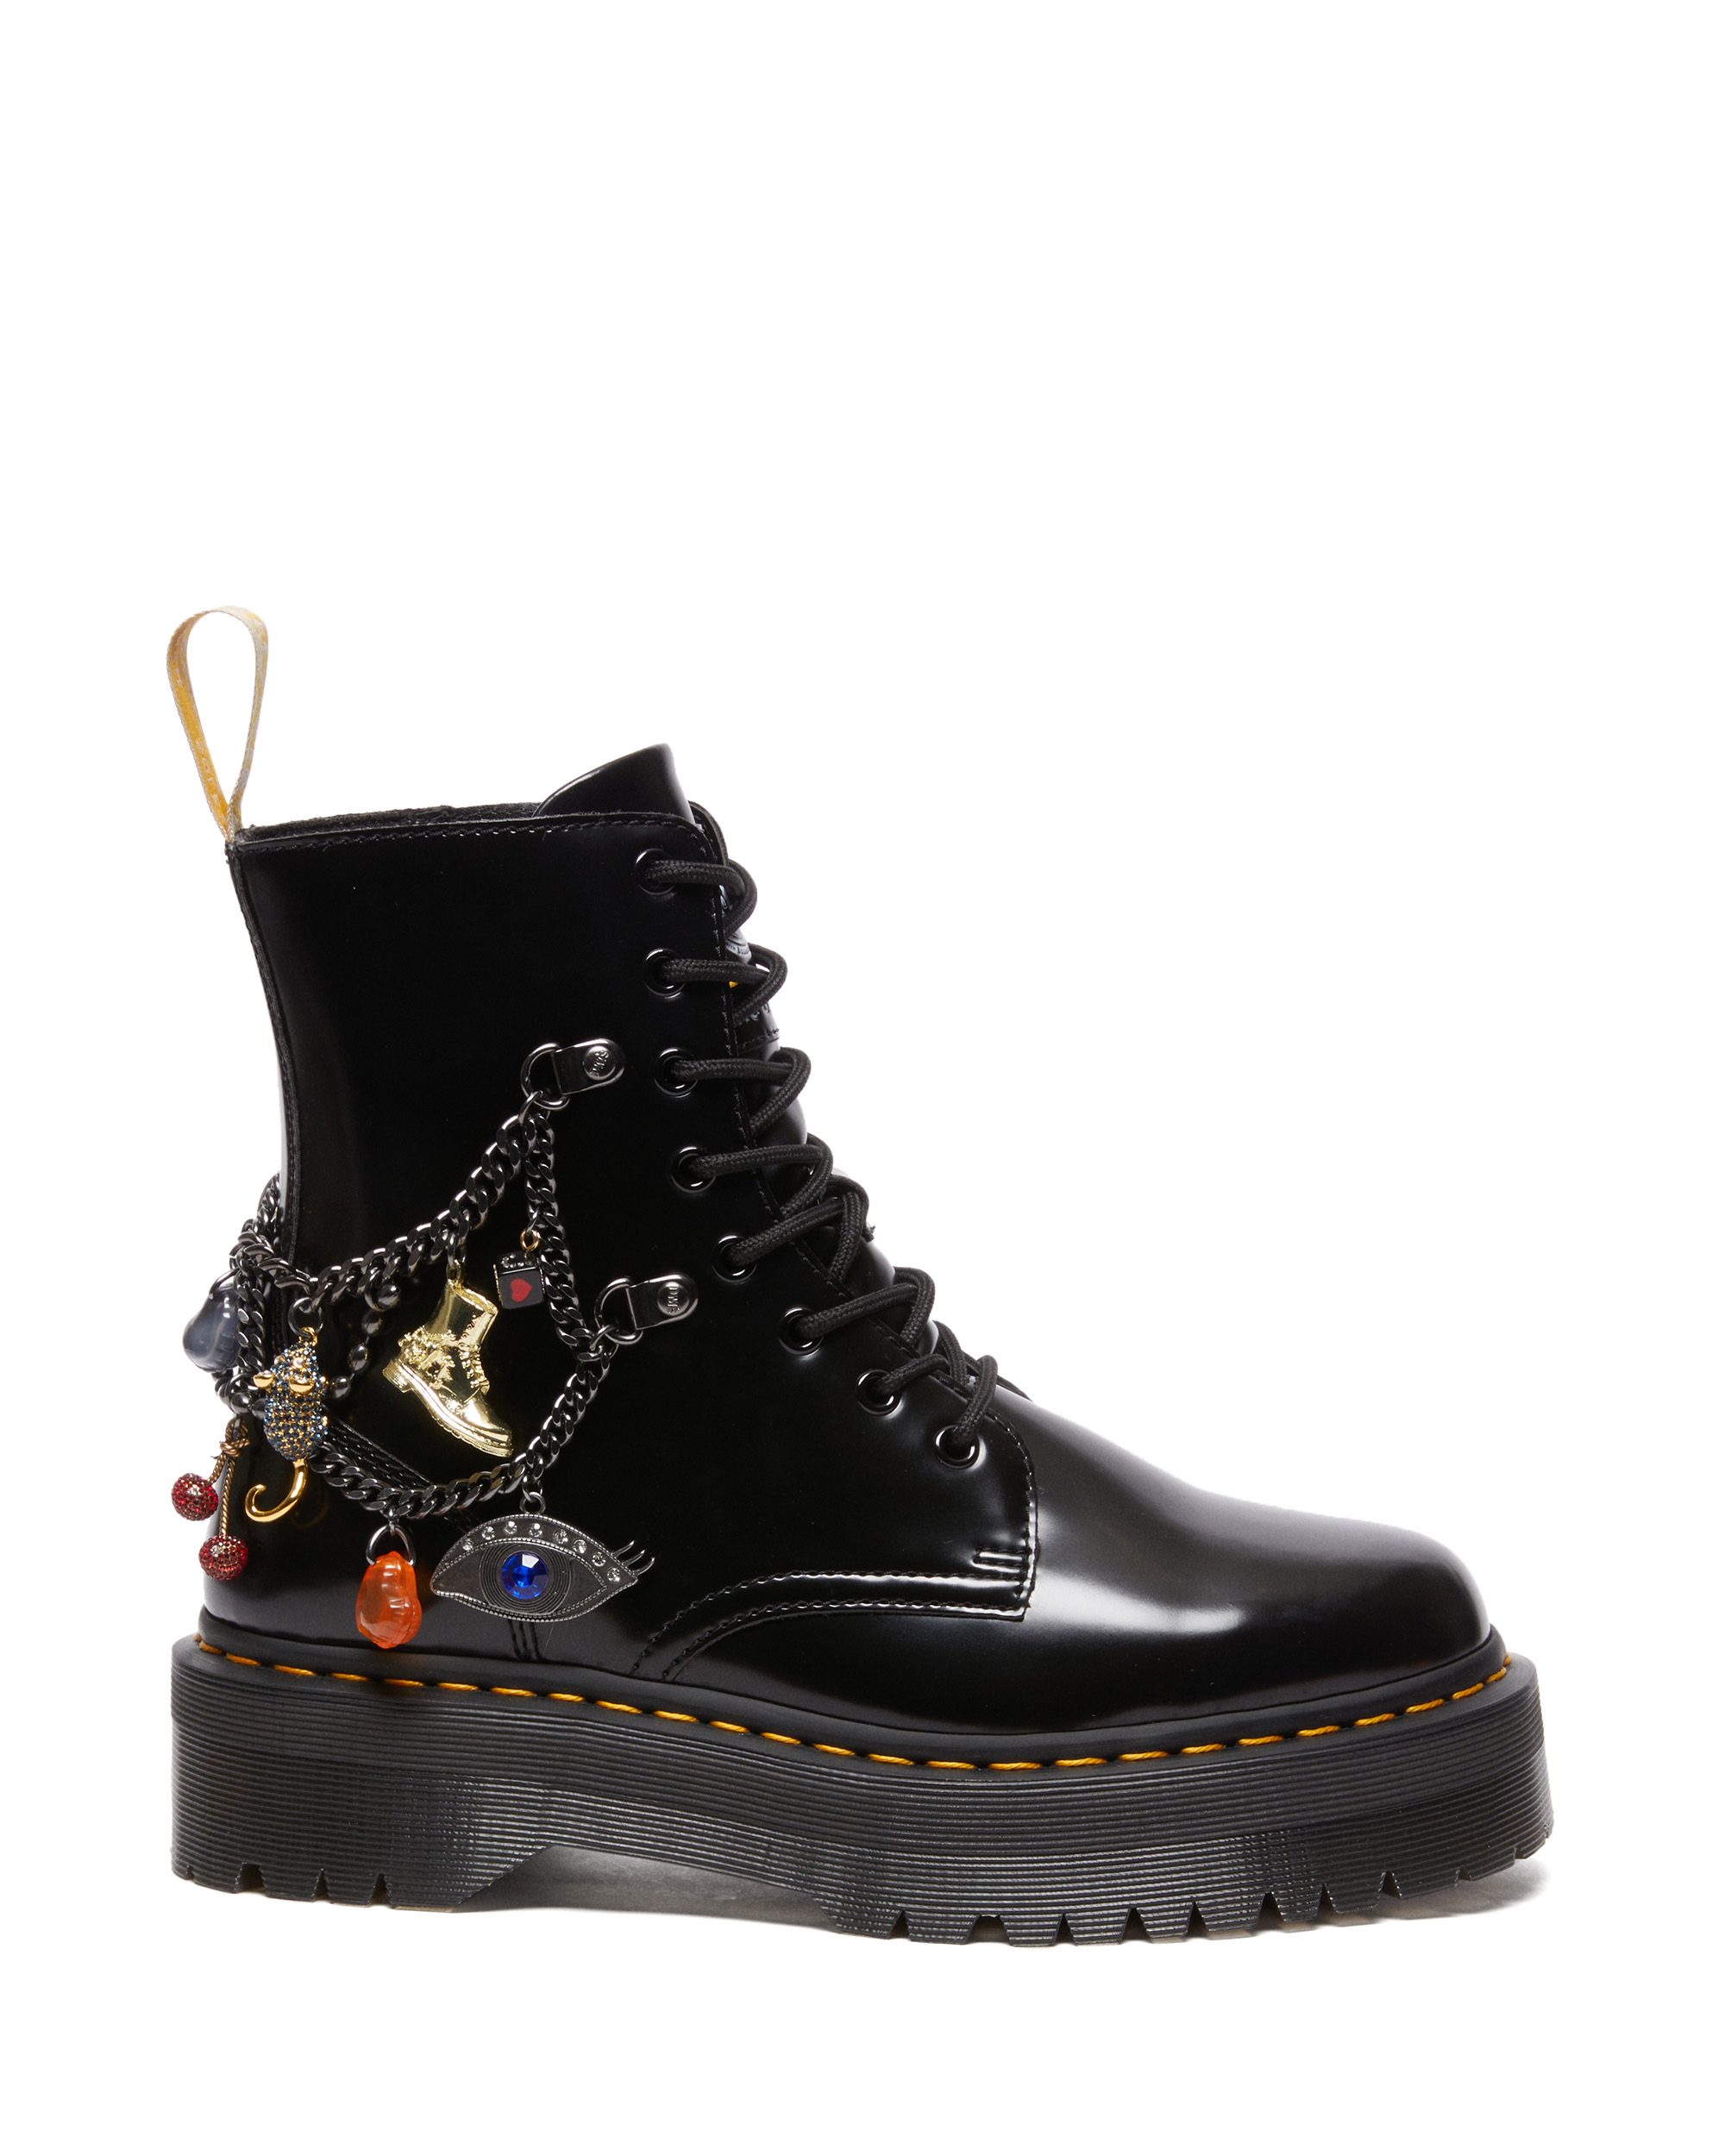 It’s Not a Phase: Dr. Martens & Marc Jacobs’ Latest Collab Is Grungier Than Ever